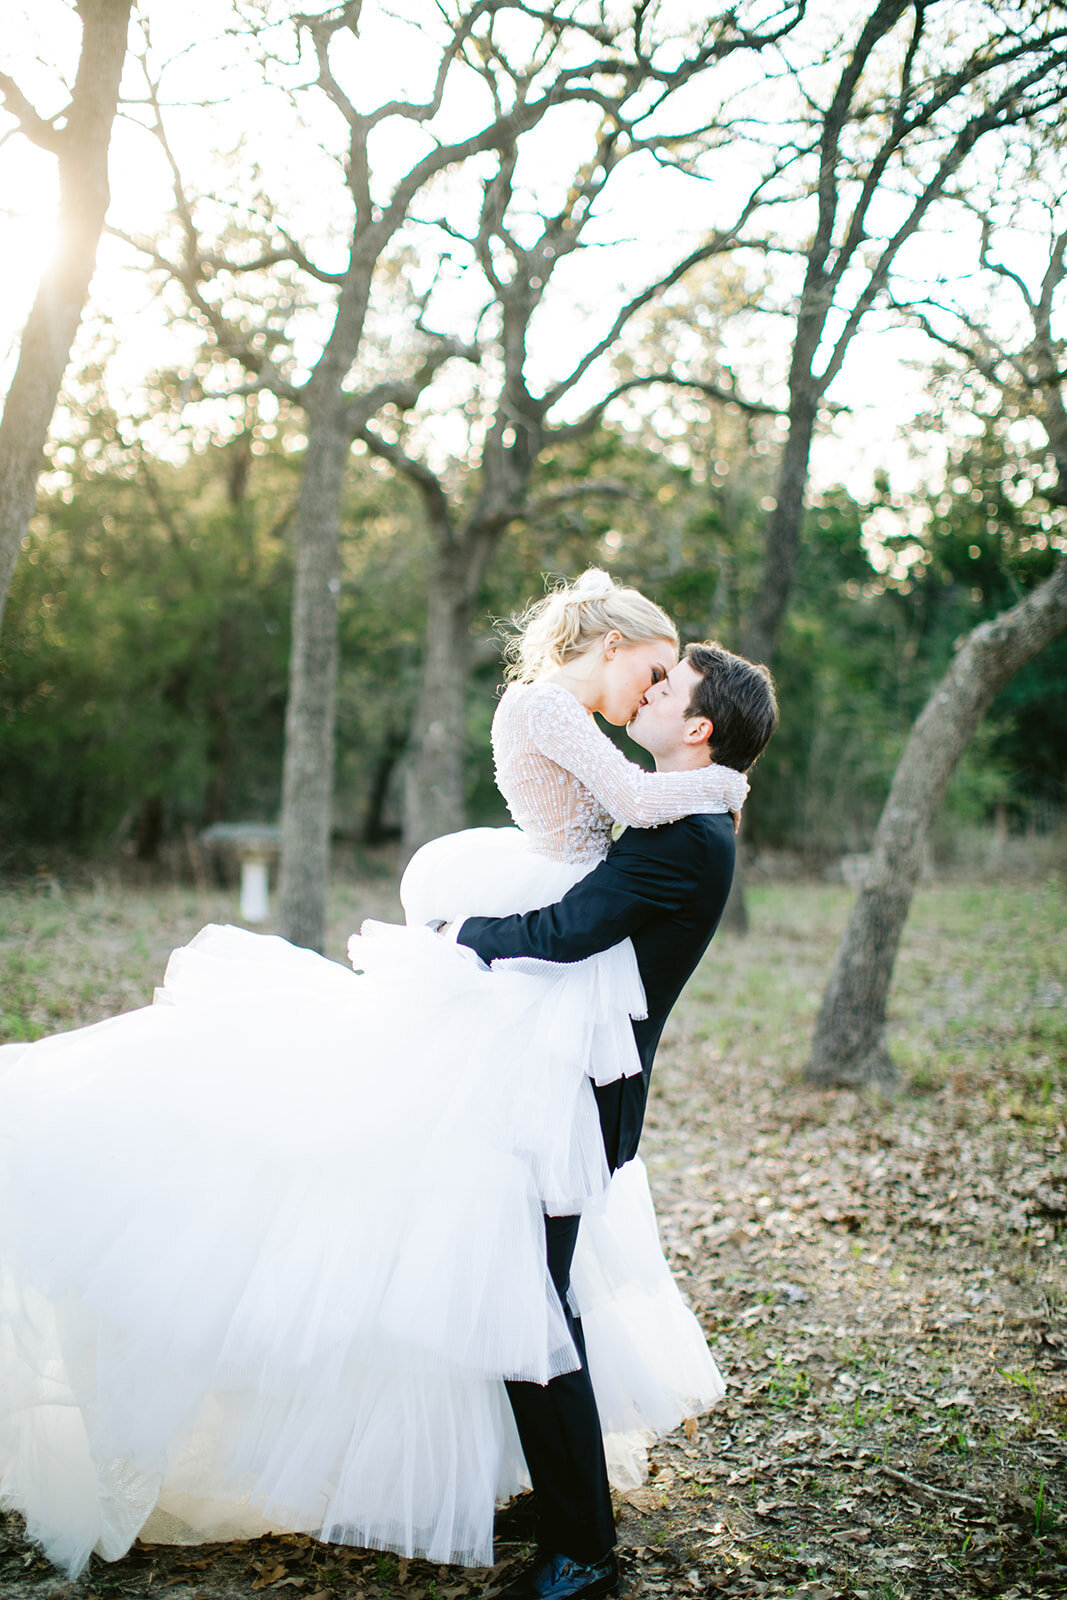 Texas Styled Shoot at the Grand Lady Austin Texas 71